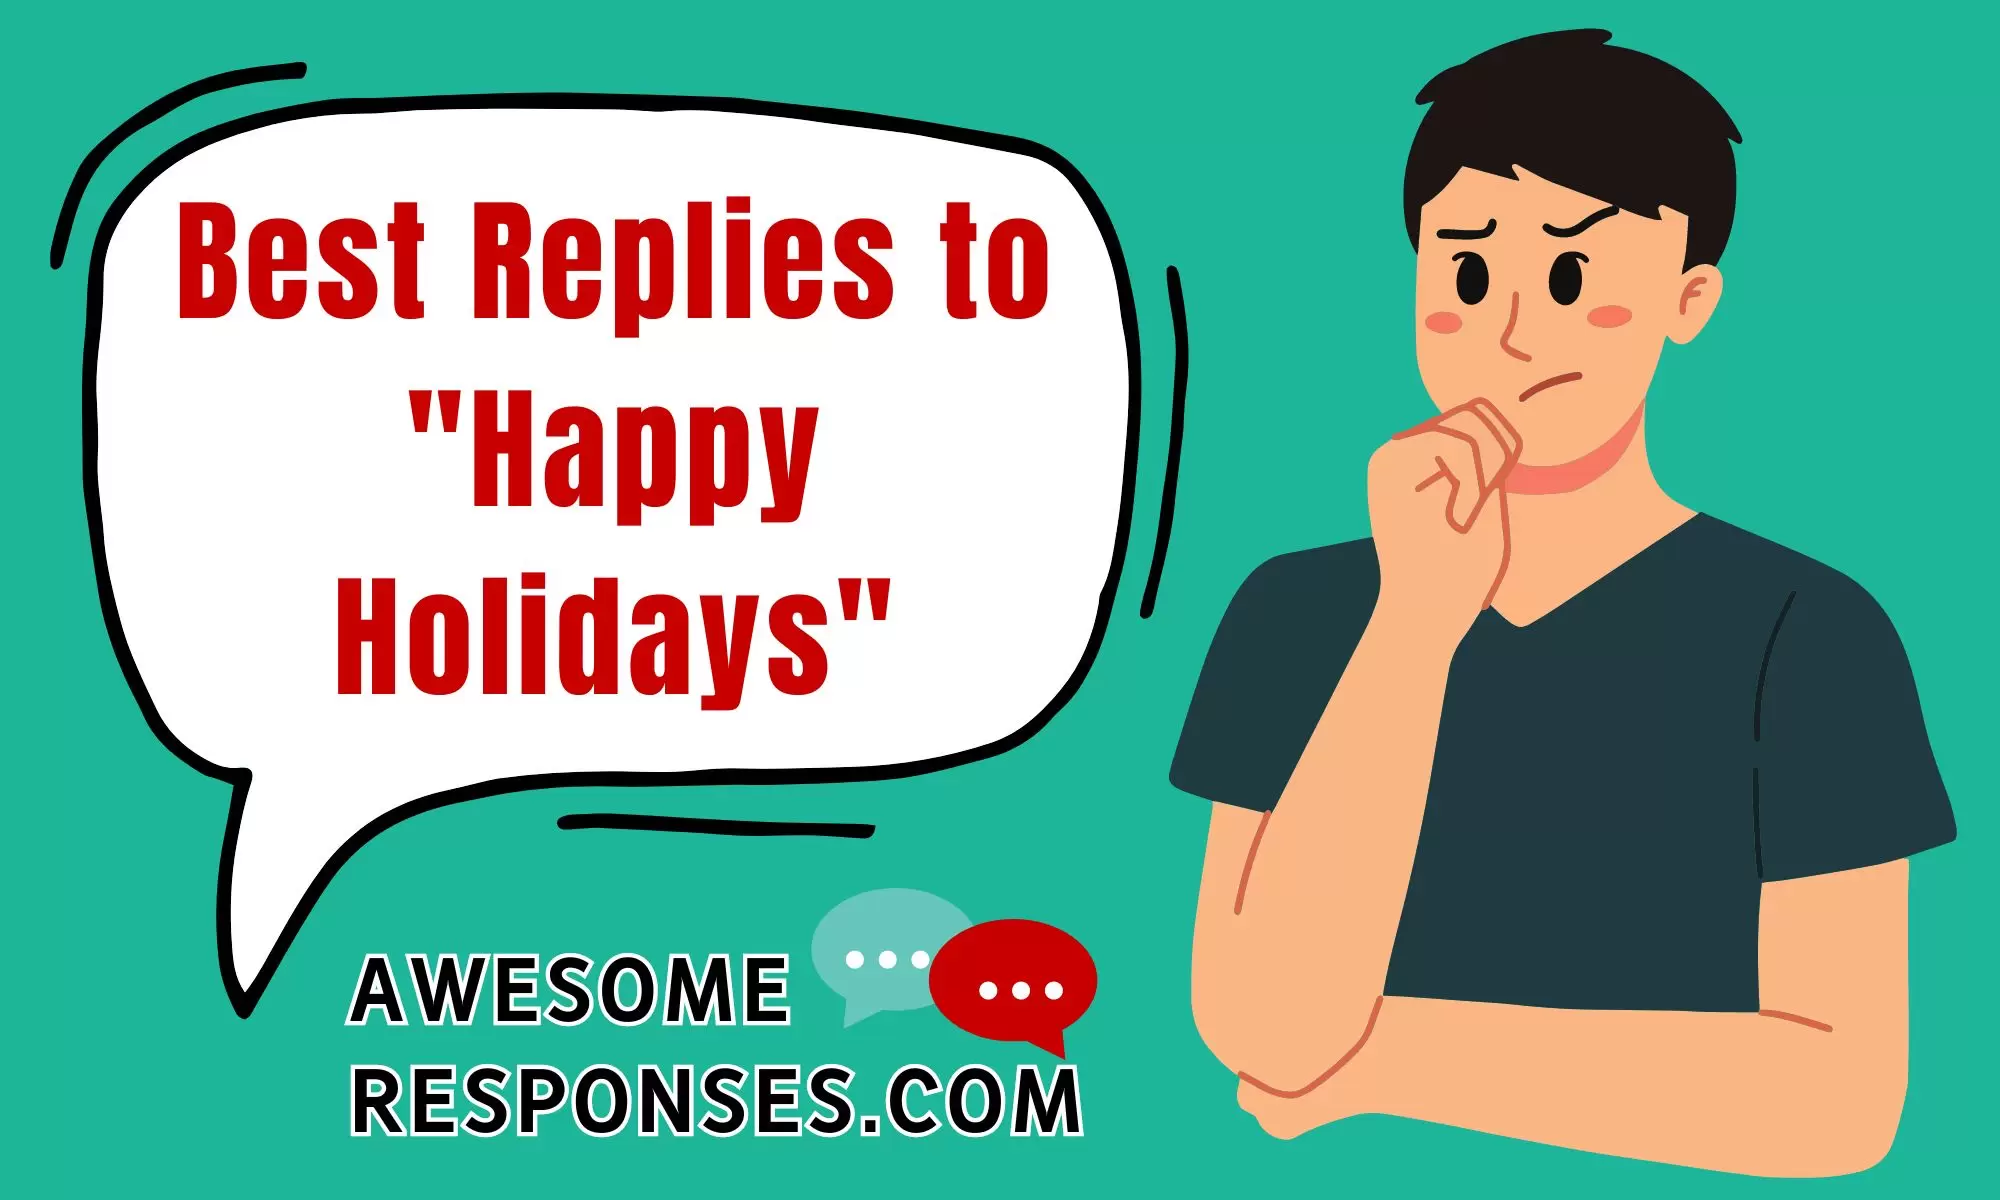 Best Replies to "Happy Holidays"